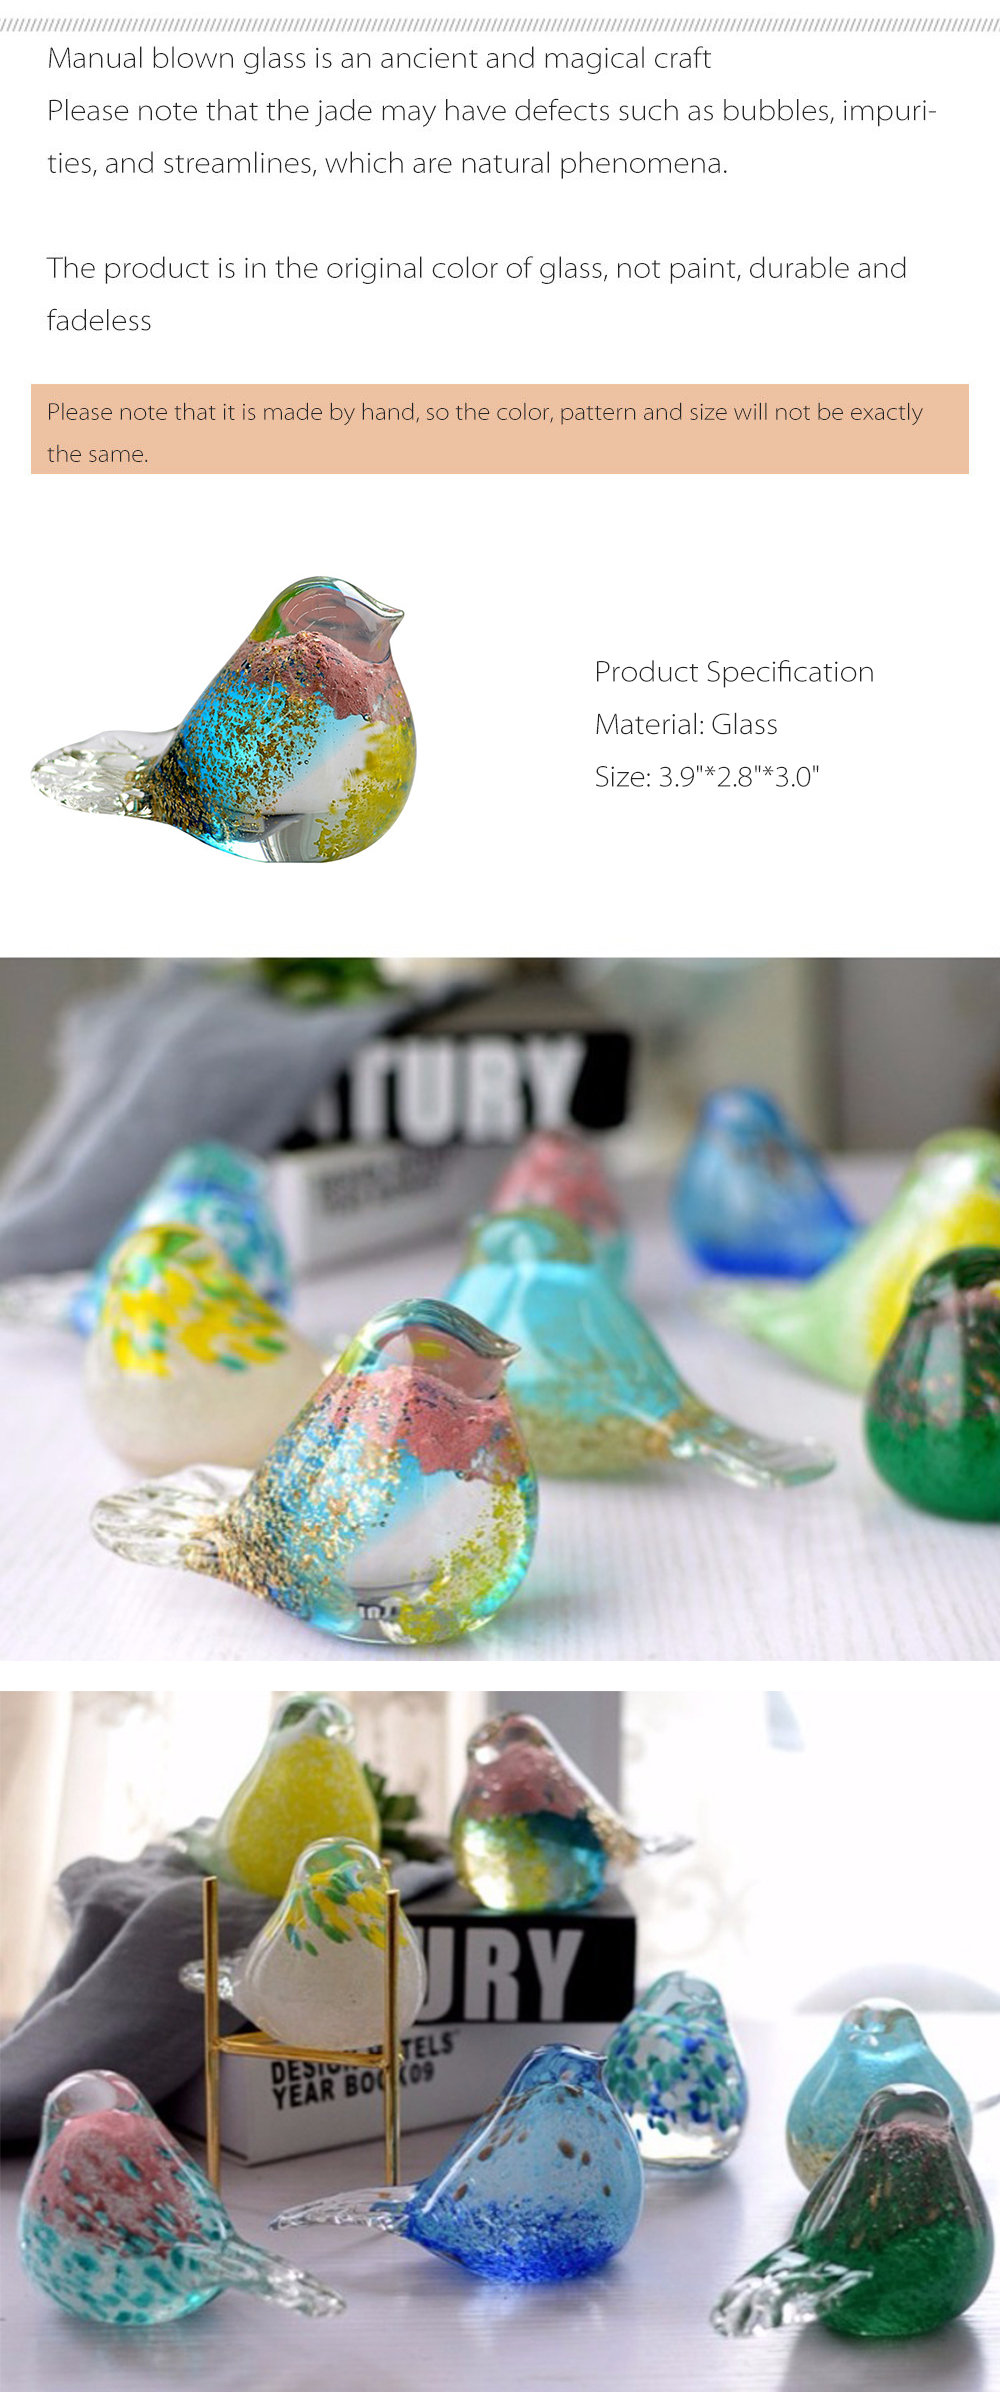 Handcrafted Glass Birds - Sky Blue - Green - 3 Colors Available - ApolloBox